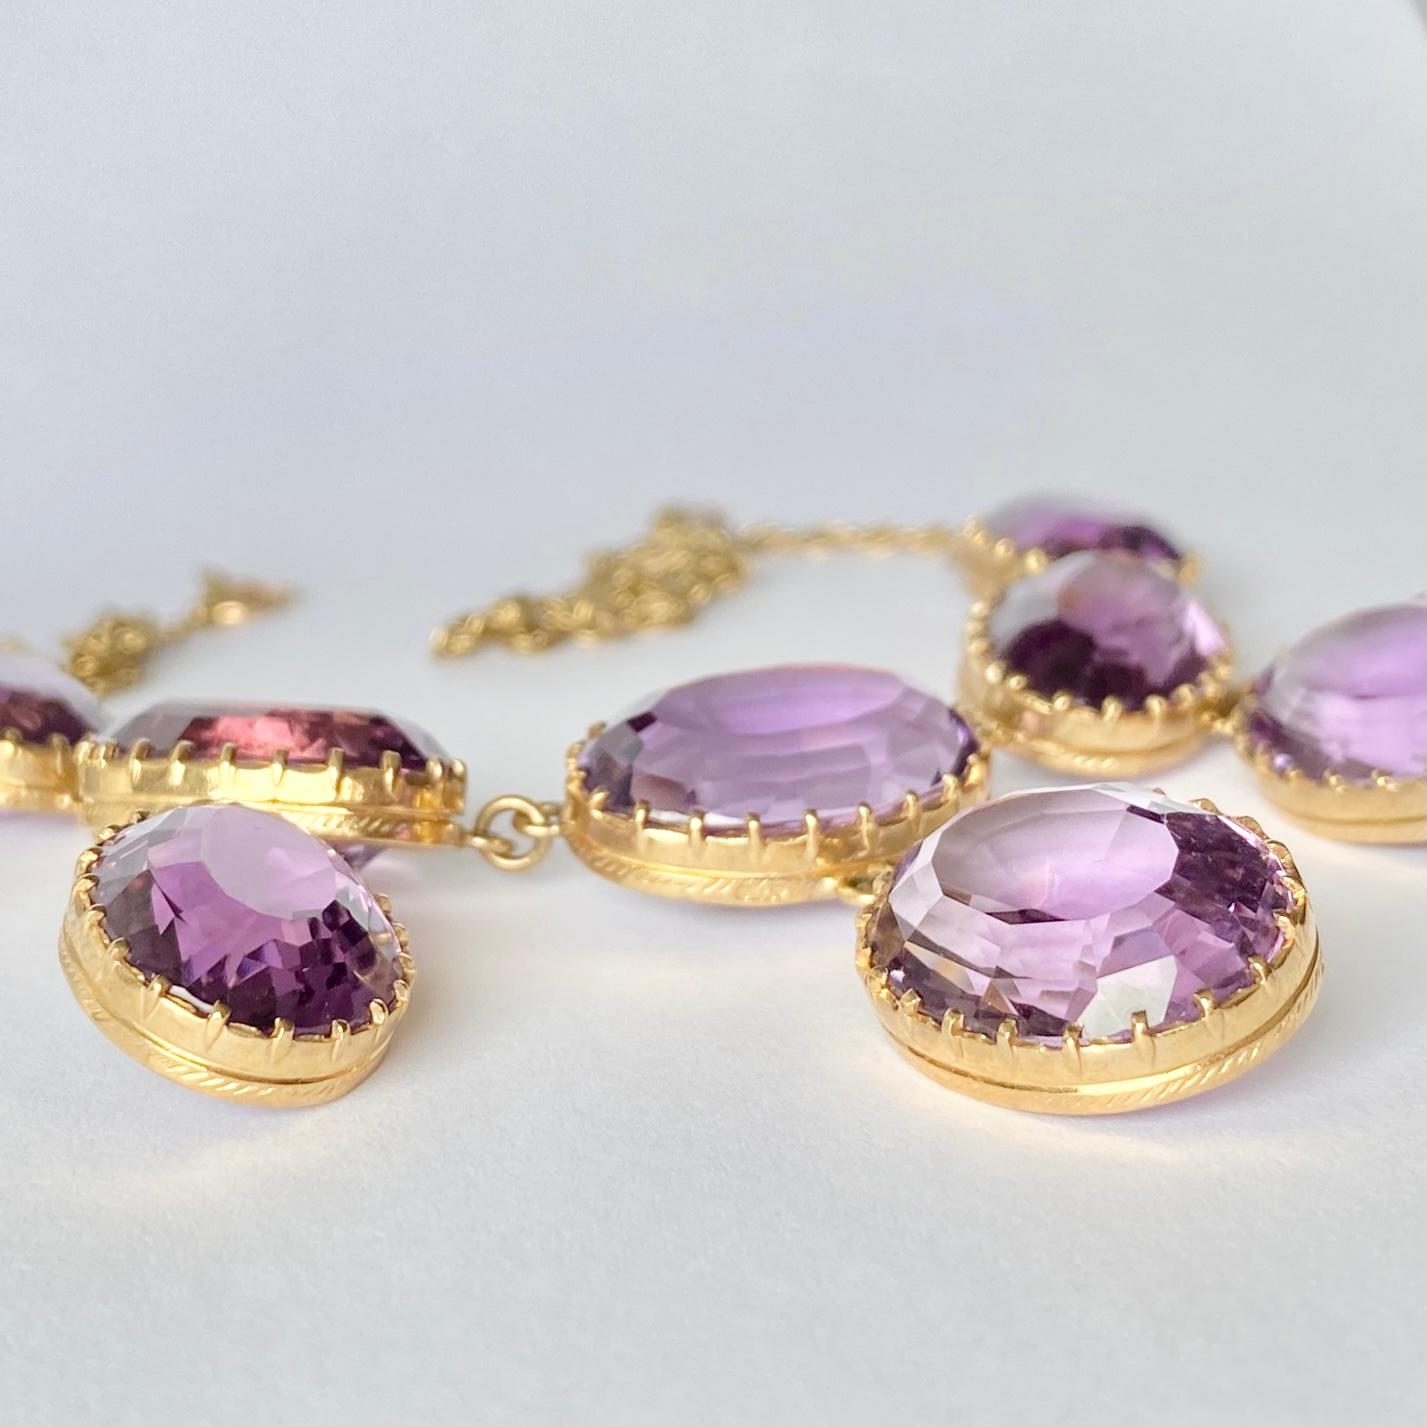 Seven stunning bright purple amethyst stones adorn this necklace. The 9ct gold rope chain is delicate compared to the chunky stones and is fastened using a bolt clasp.

Length: 47.5cm
Stone Dimensions: 16x12 - 18x15mm

Weight: 27.6g